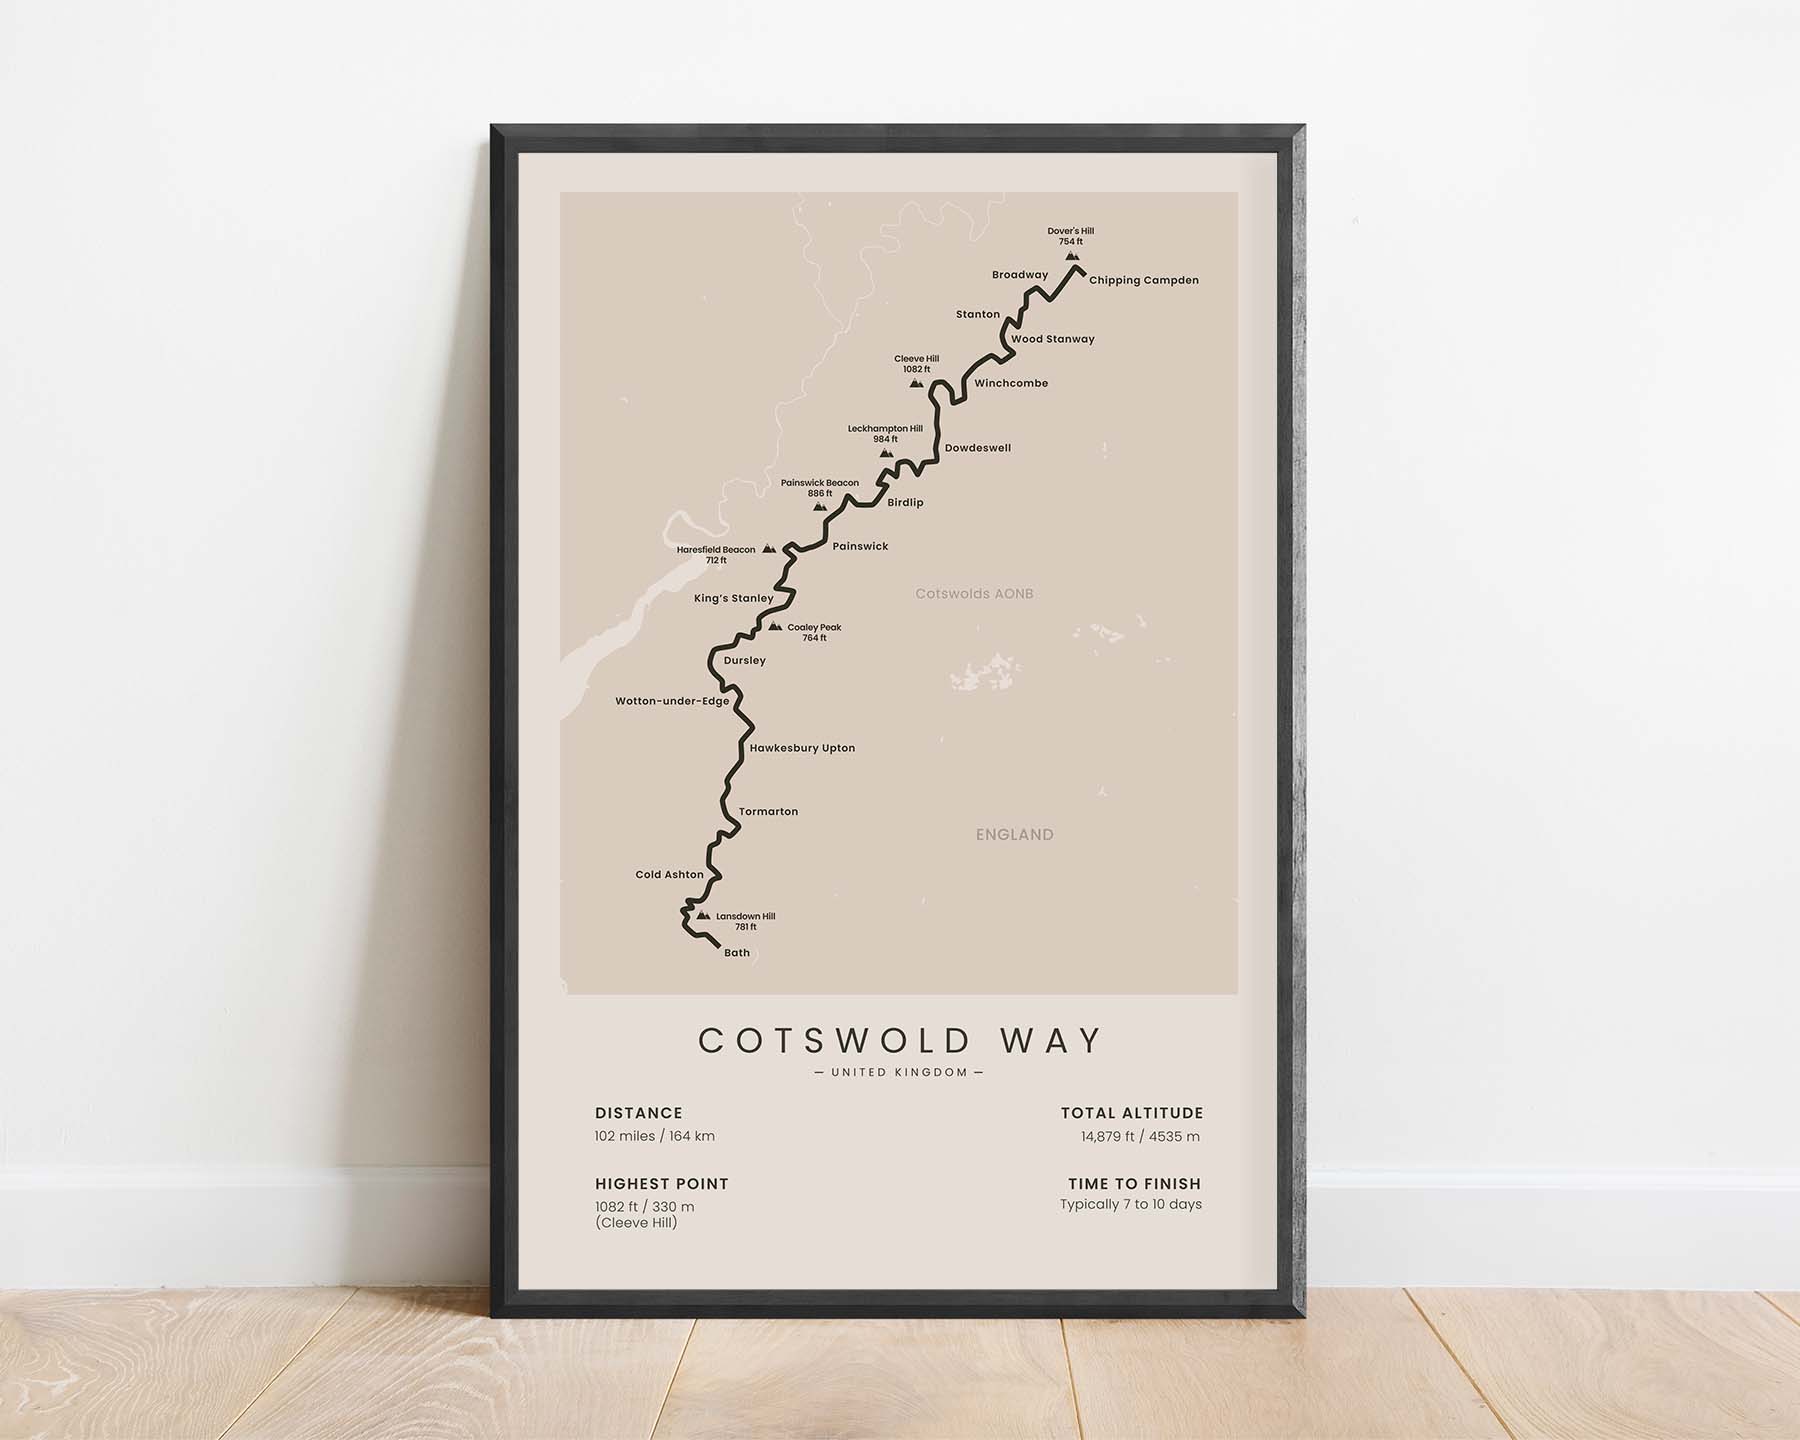 Cotswold Way (United Kingdom, Chipping Campden to Bath, England, Cotswolds AONB) Hike Wall Map with Beige Background